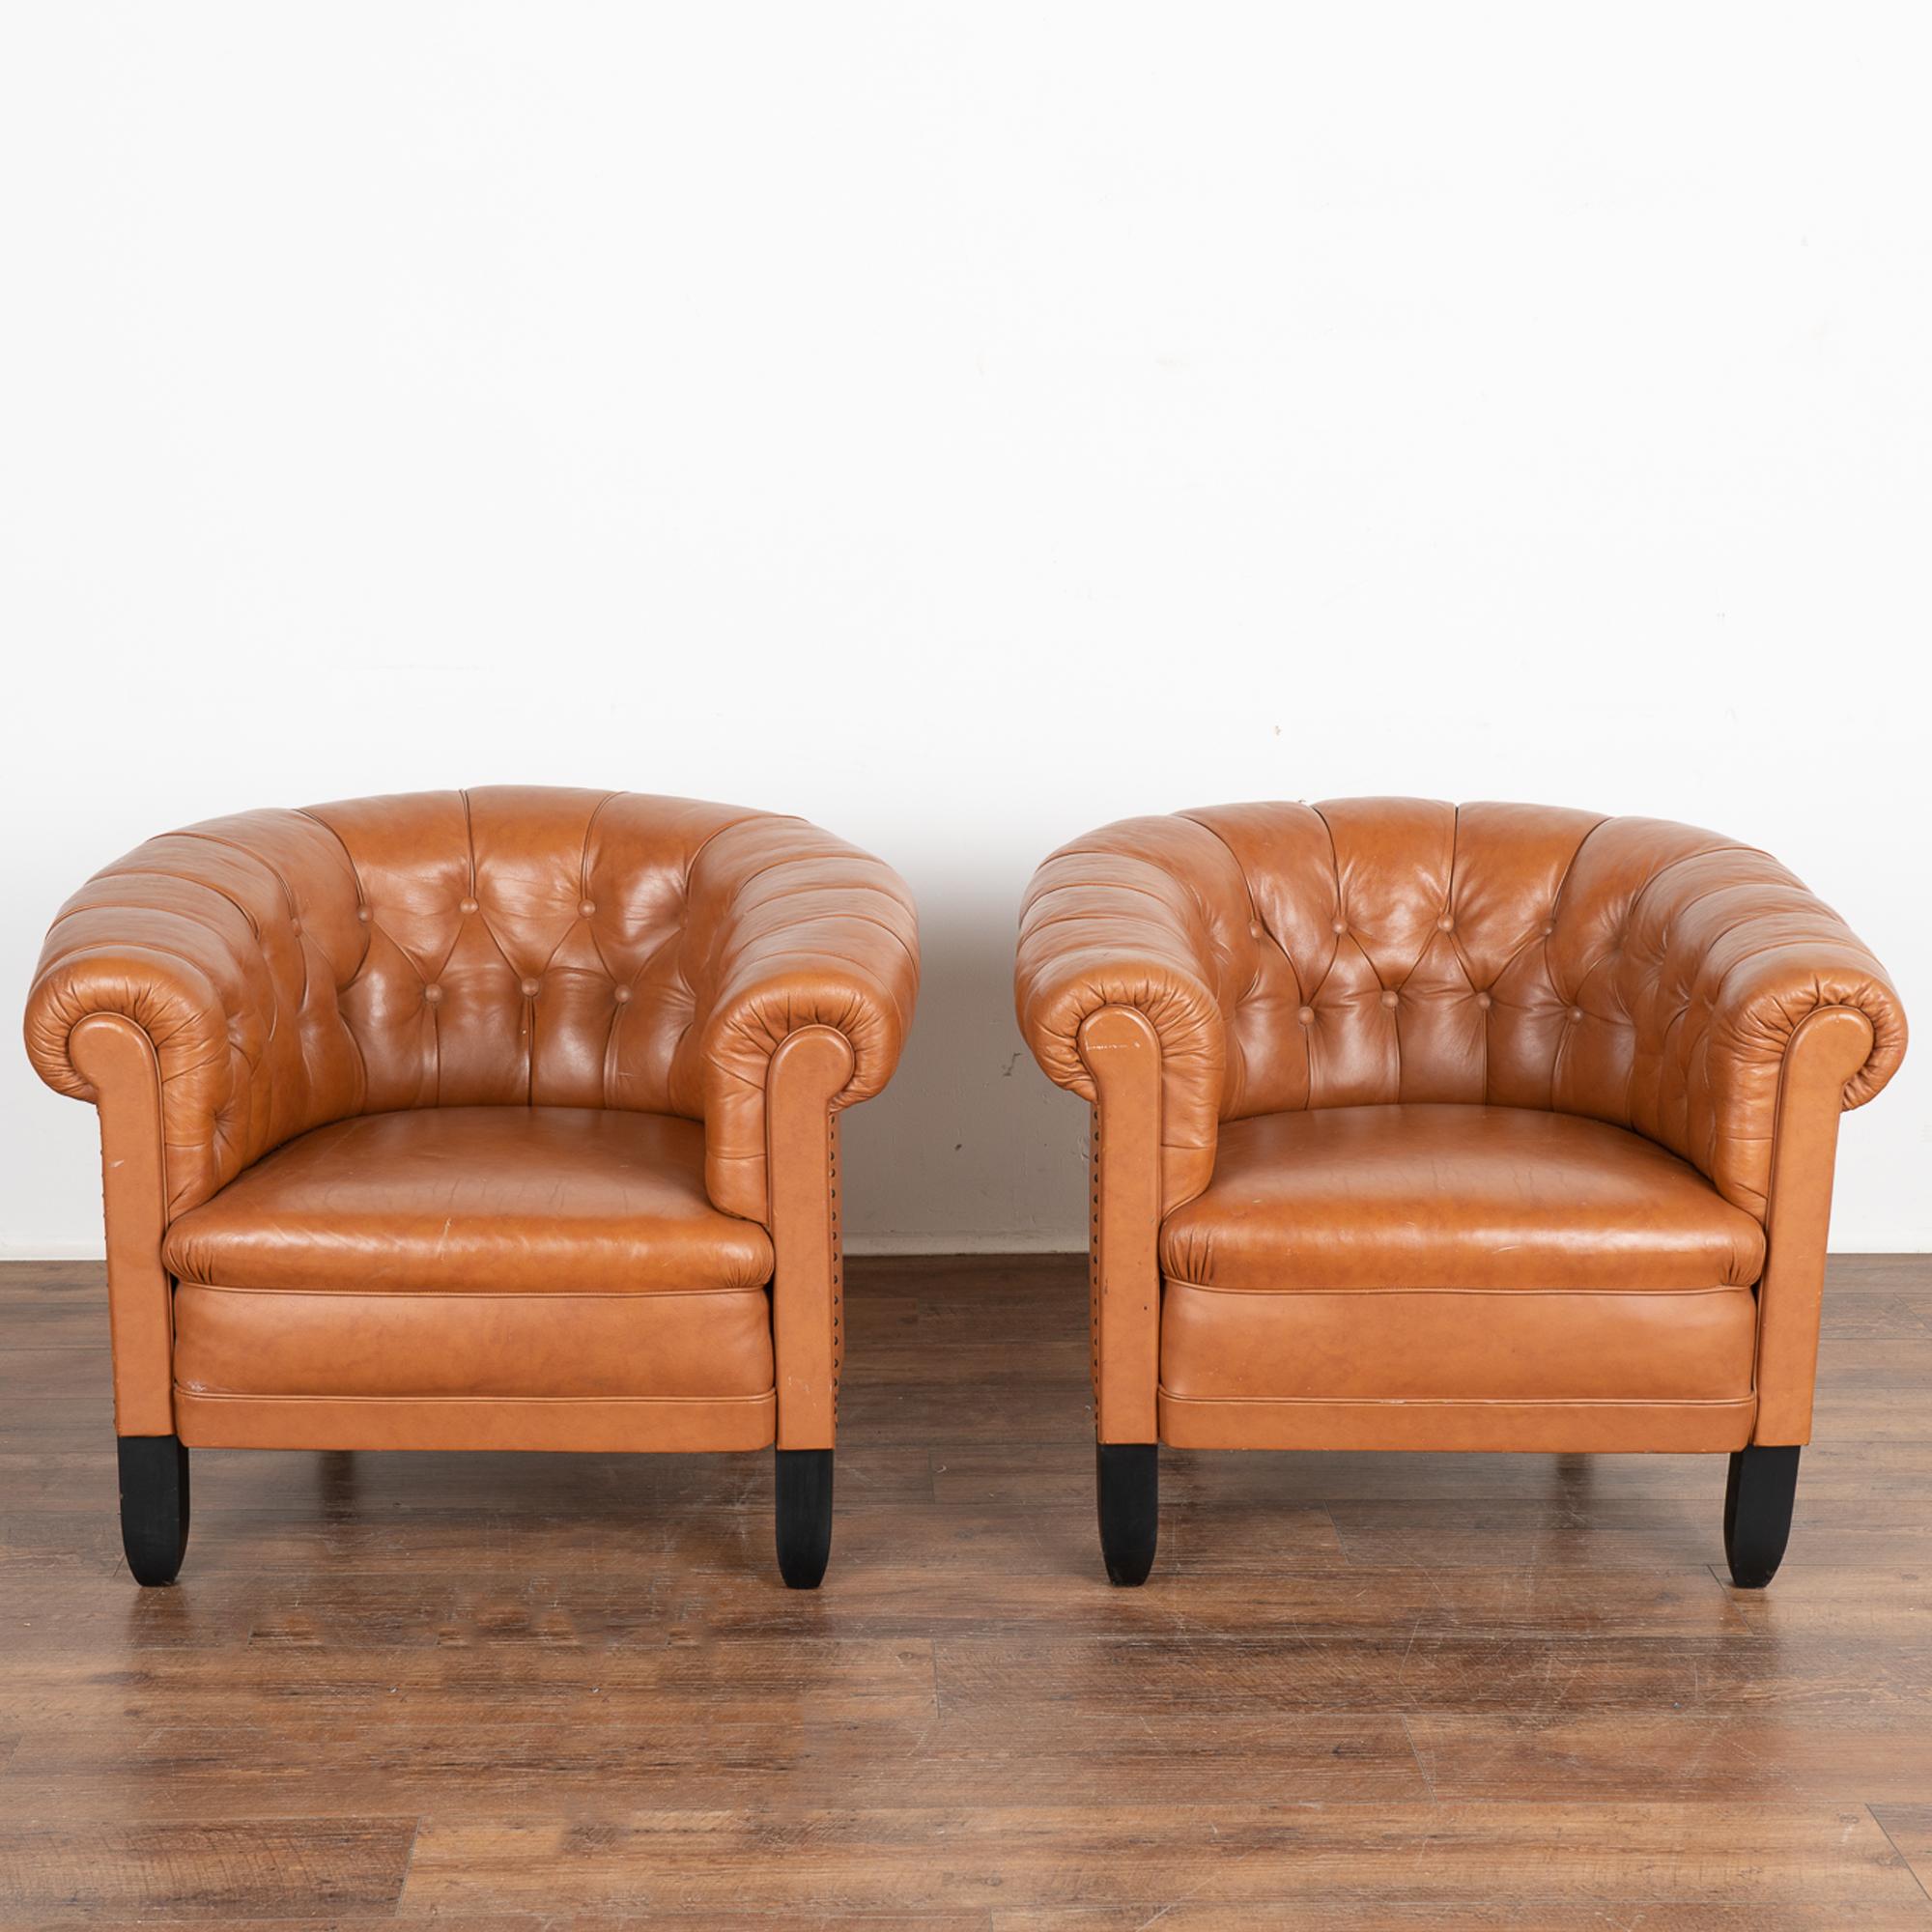 Chesterfield Pair, Vintage Brown Leather Barrel Back Arm Chairs, Denmark circa 1940 For Sale